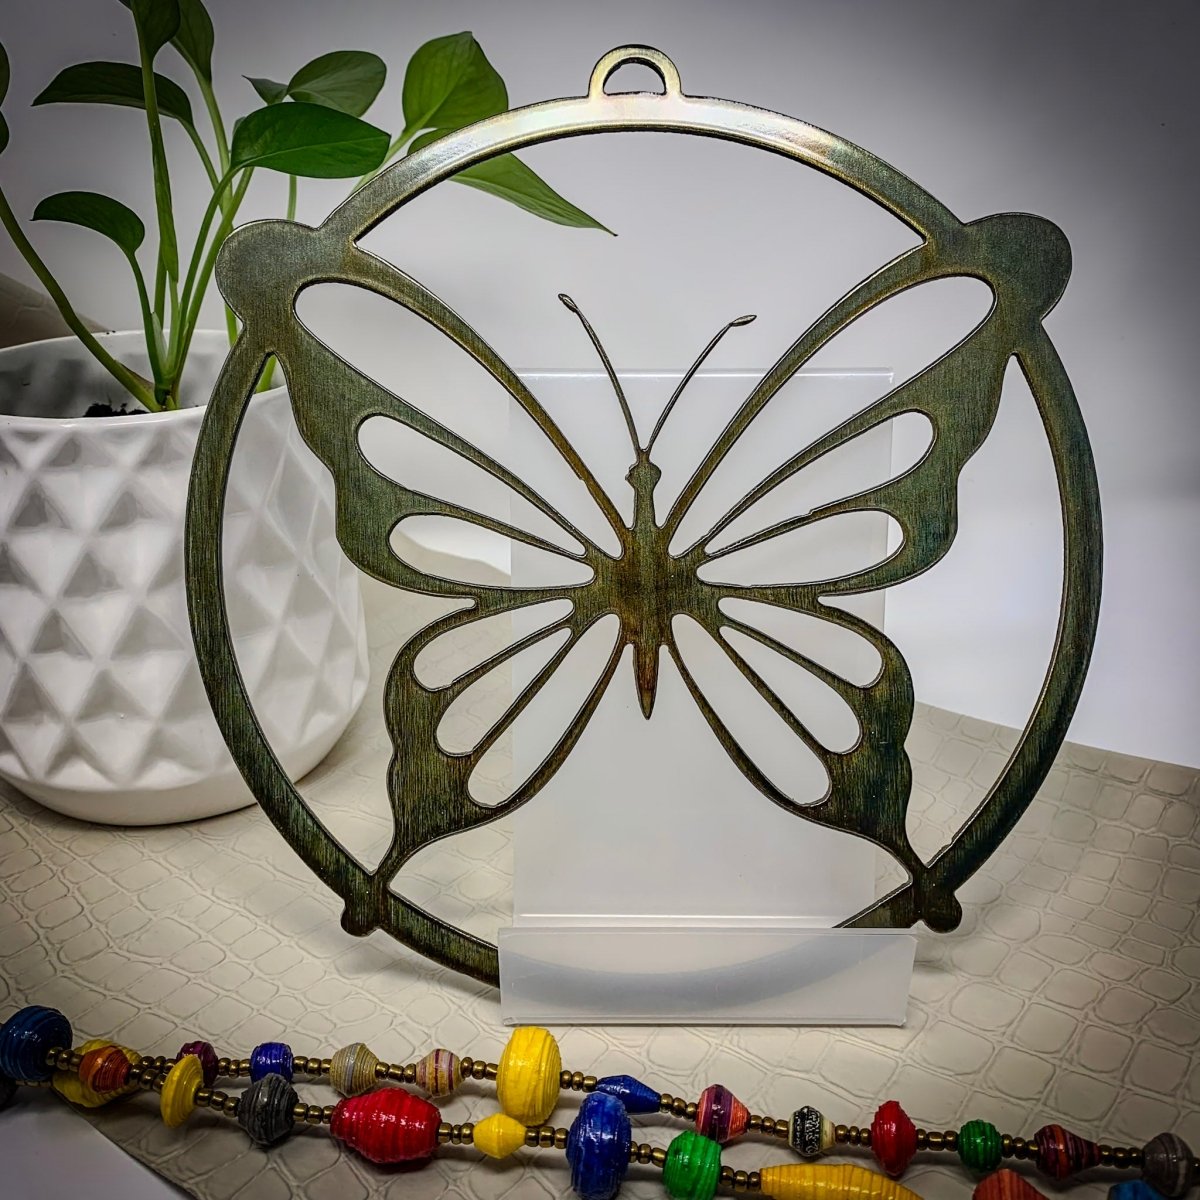 Butterfly Metal Ring - The Iron Hutch